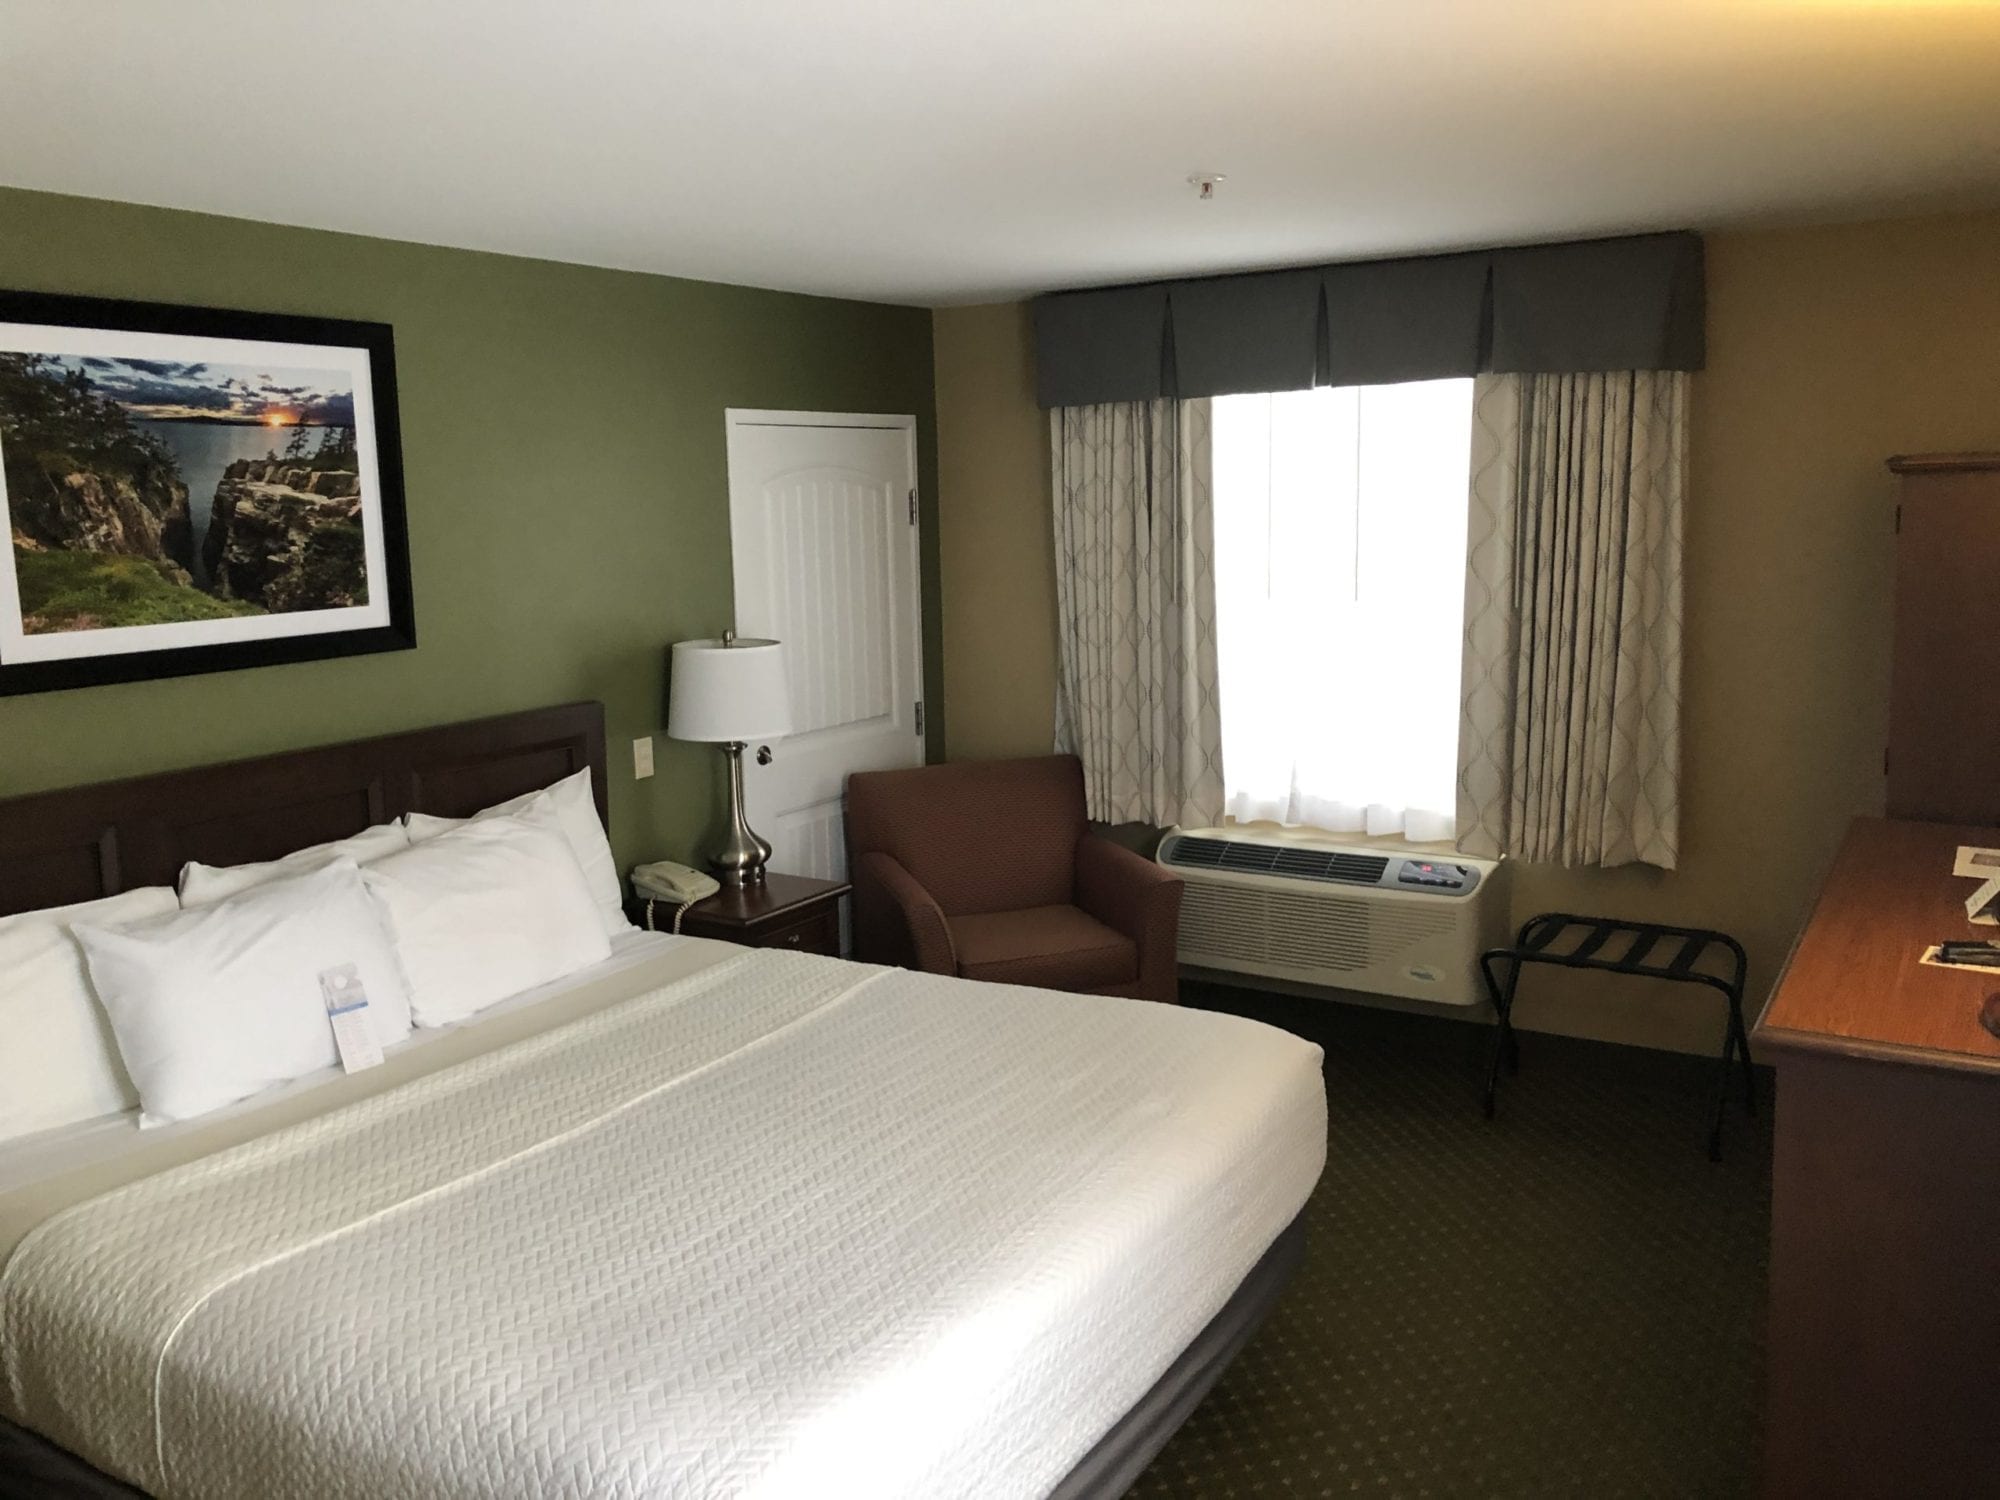 Photo of the bedroom of the Accessible King room with roll-in shower at the Acadia Inn.